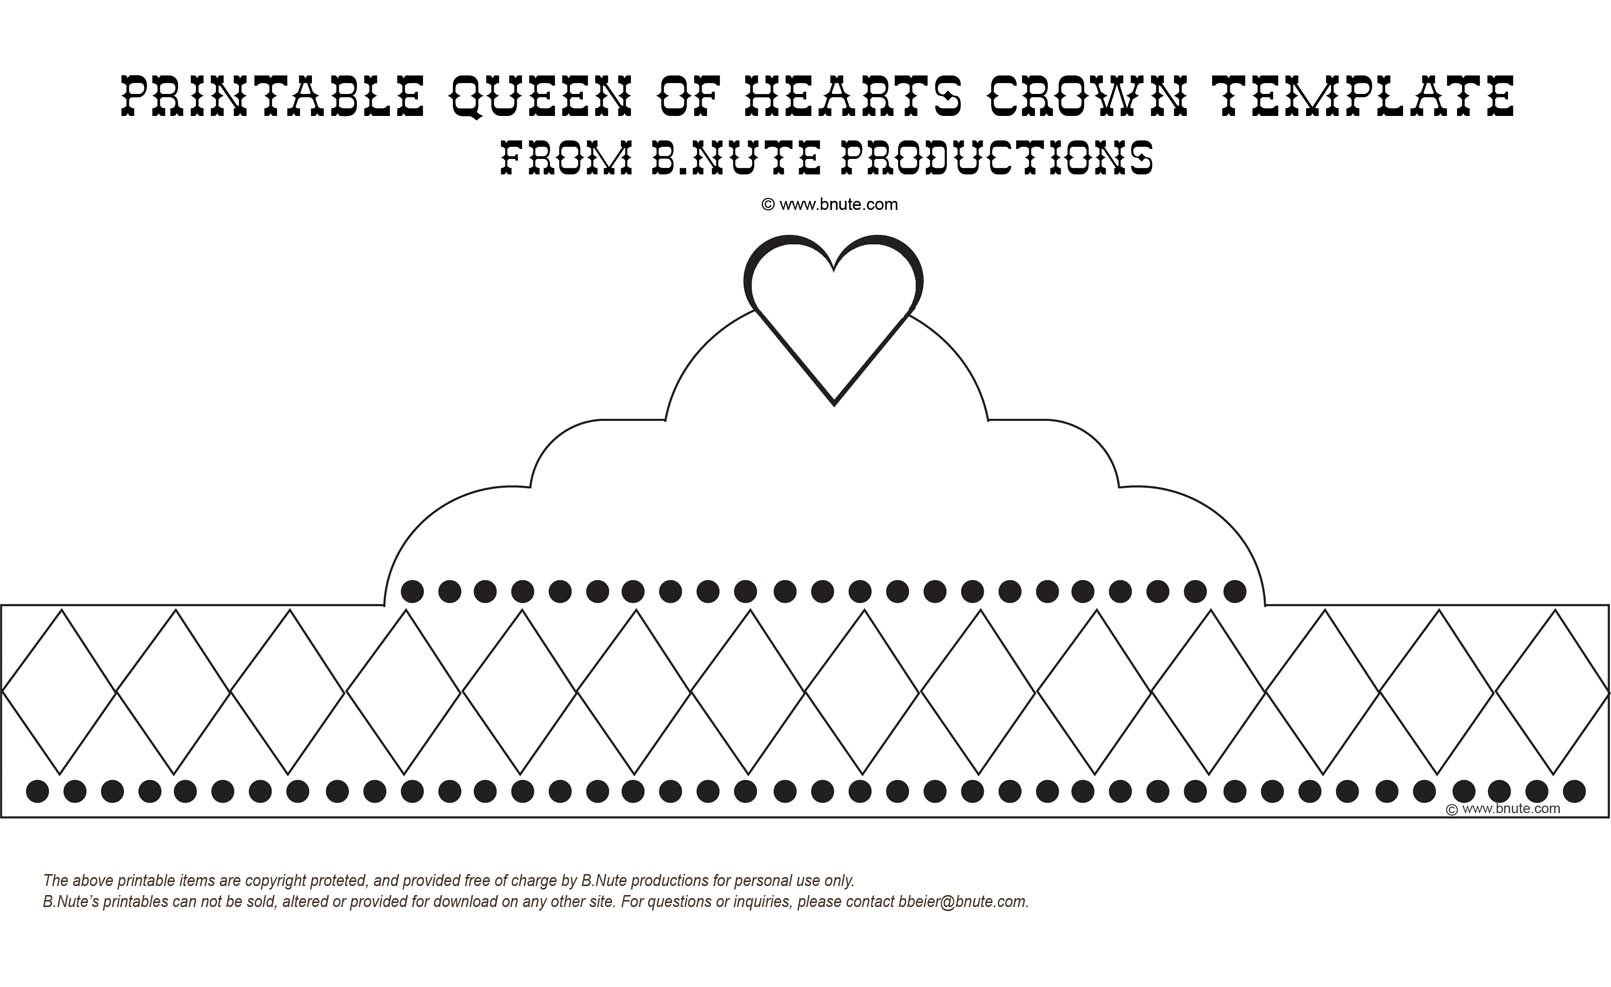 Queen Of Hearts Crown Template Bnute Productions Mad Hatter Tea Party Printable Queen